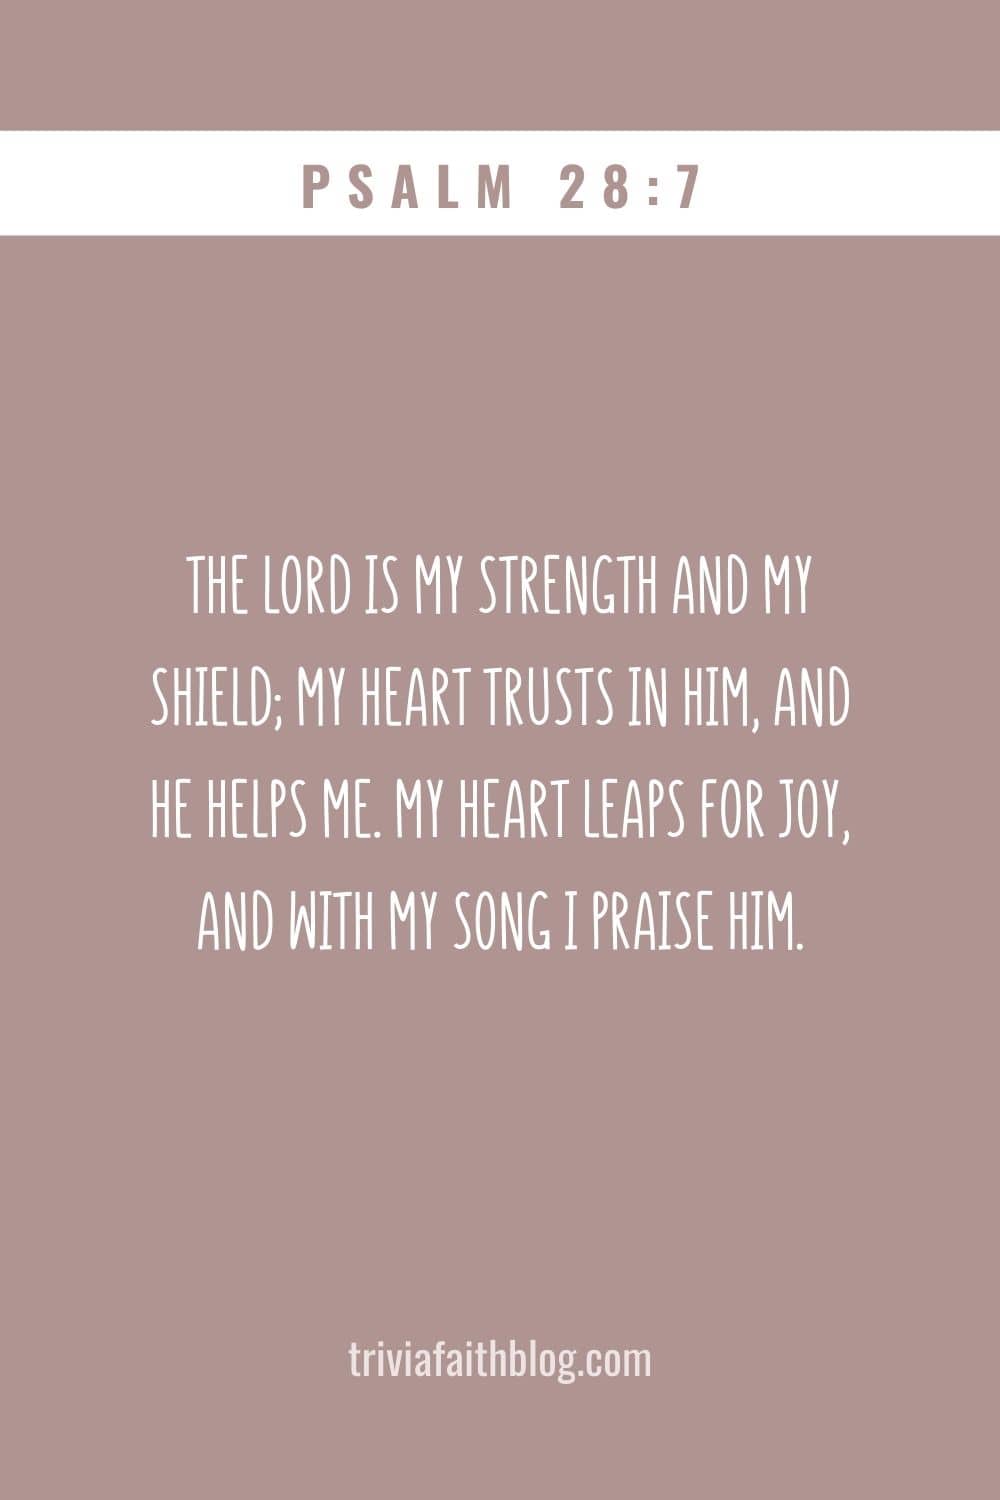 The Lord is my strength and my shield; my heart trusts in him, and he helps me. My heart leaps for joy, and with my song I praise him